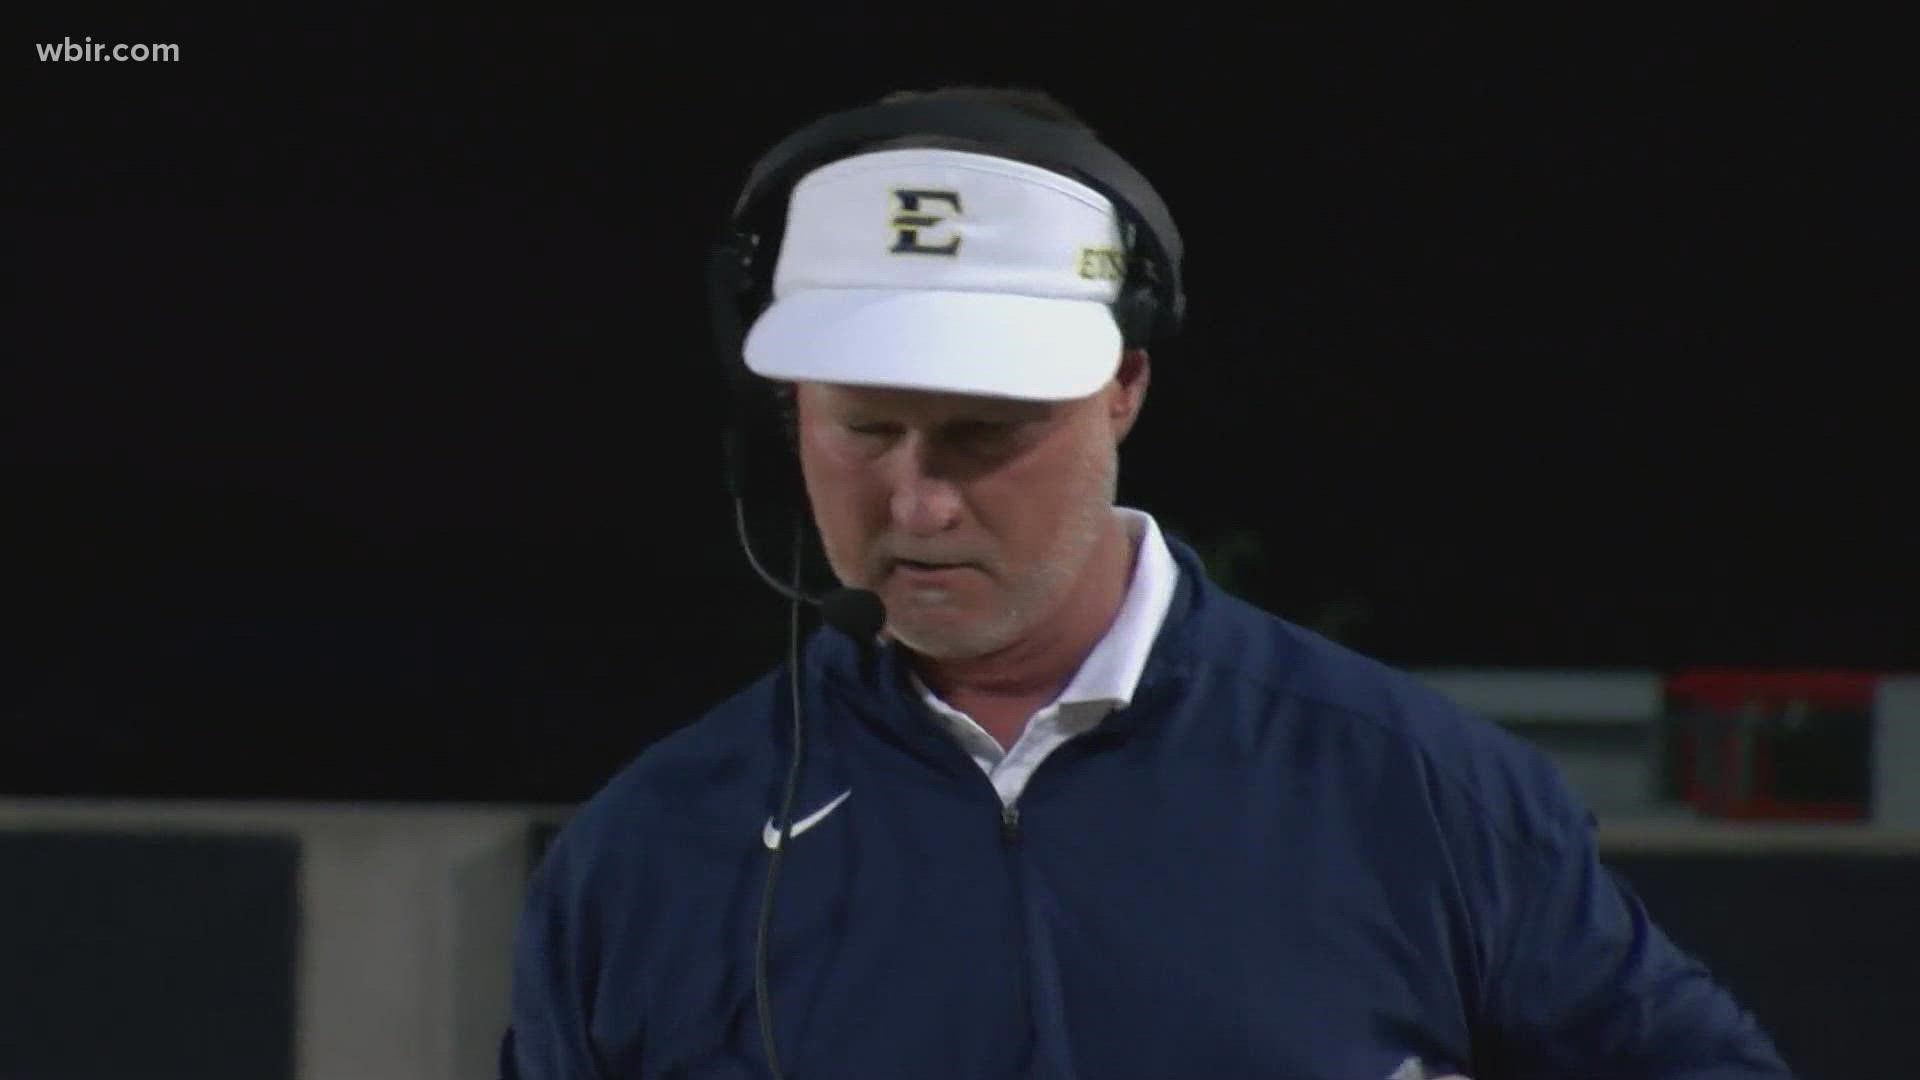 ETSU head football coach Randy Sanders announced he will retire this week. Sanders played quarterback at UT and was an assistant coach at UT from 1989 to 2005.